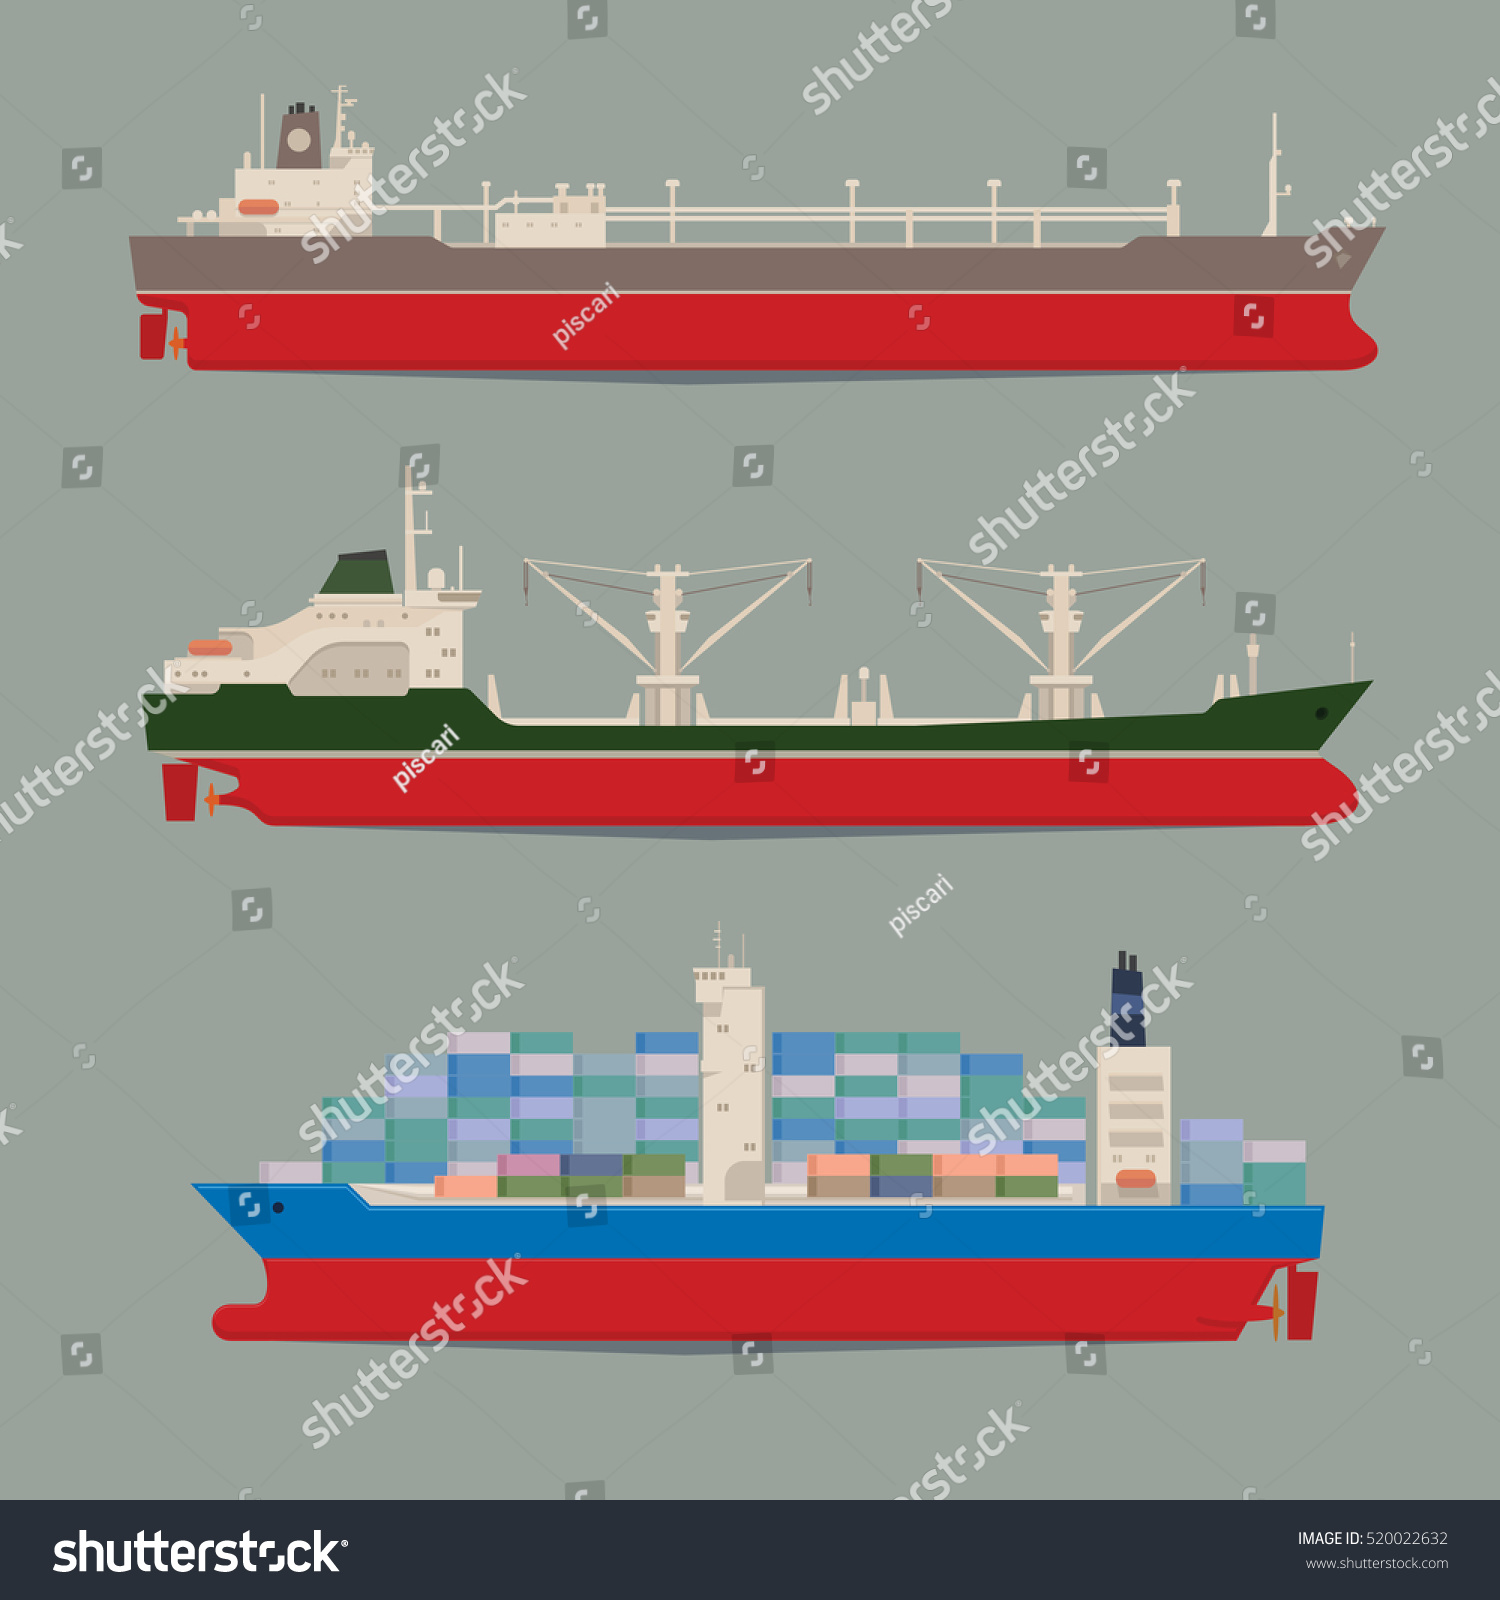 SVG of Cargo ships. Oil tanker, bulk carrier, container ship. Commercial vessels. Goods delivering business industry. Freight ships side view isolated. Vector illustration svg